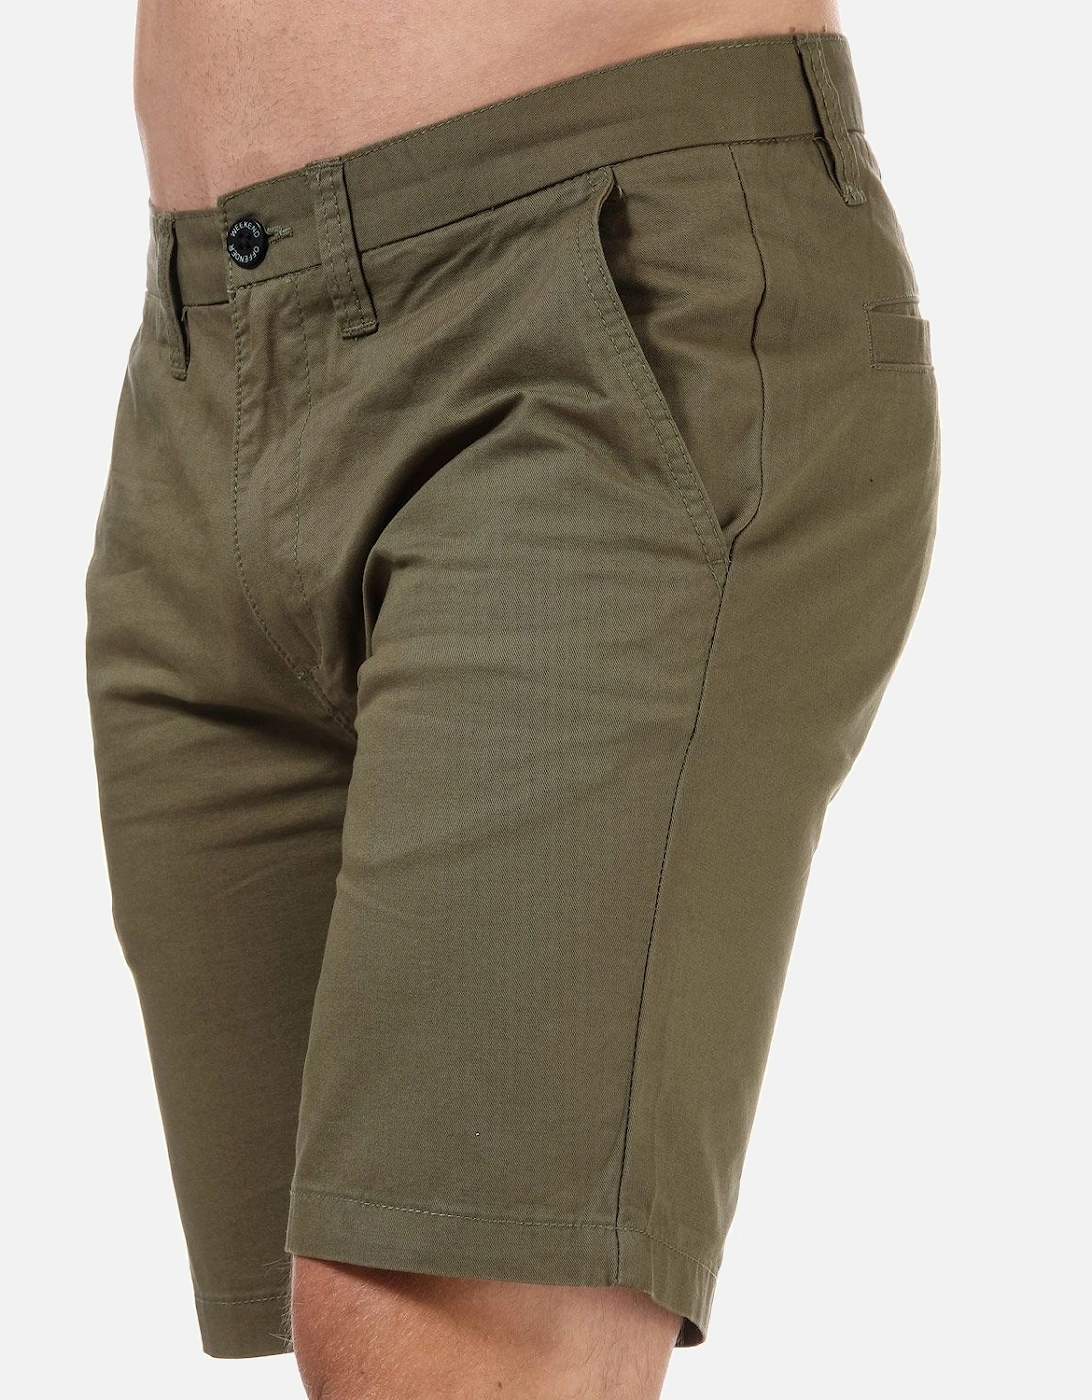 Mens Dillenger Cotton Twill Chino Shorts